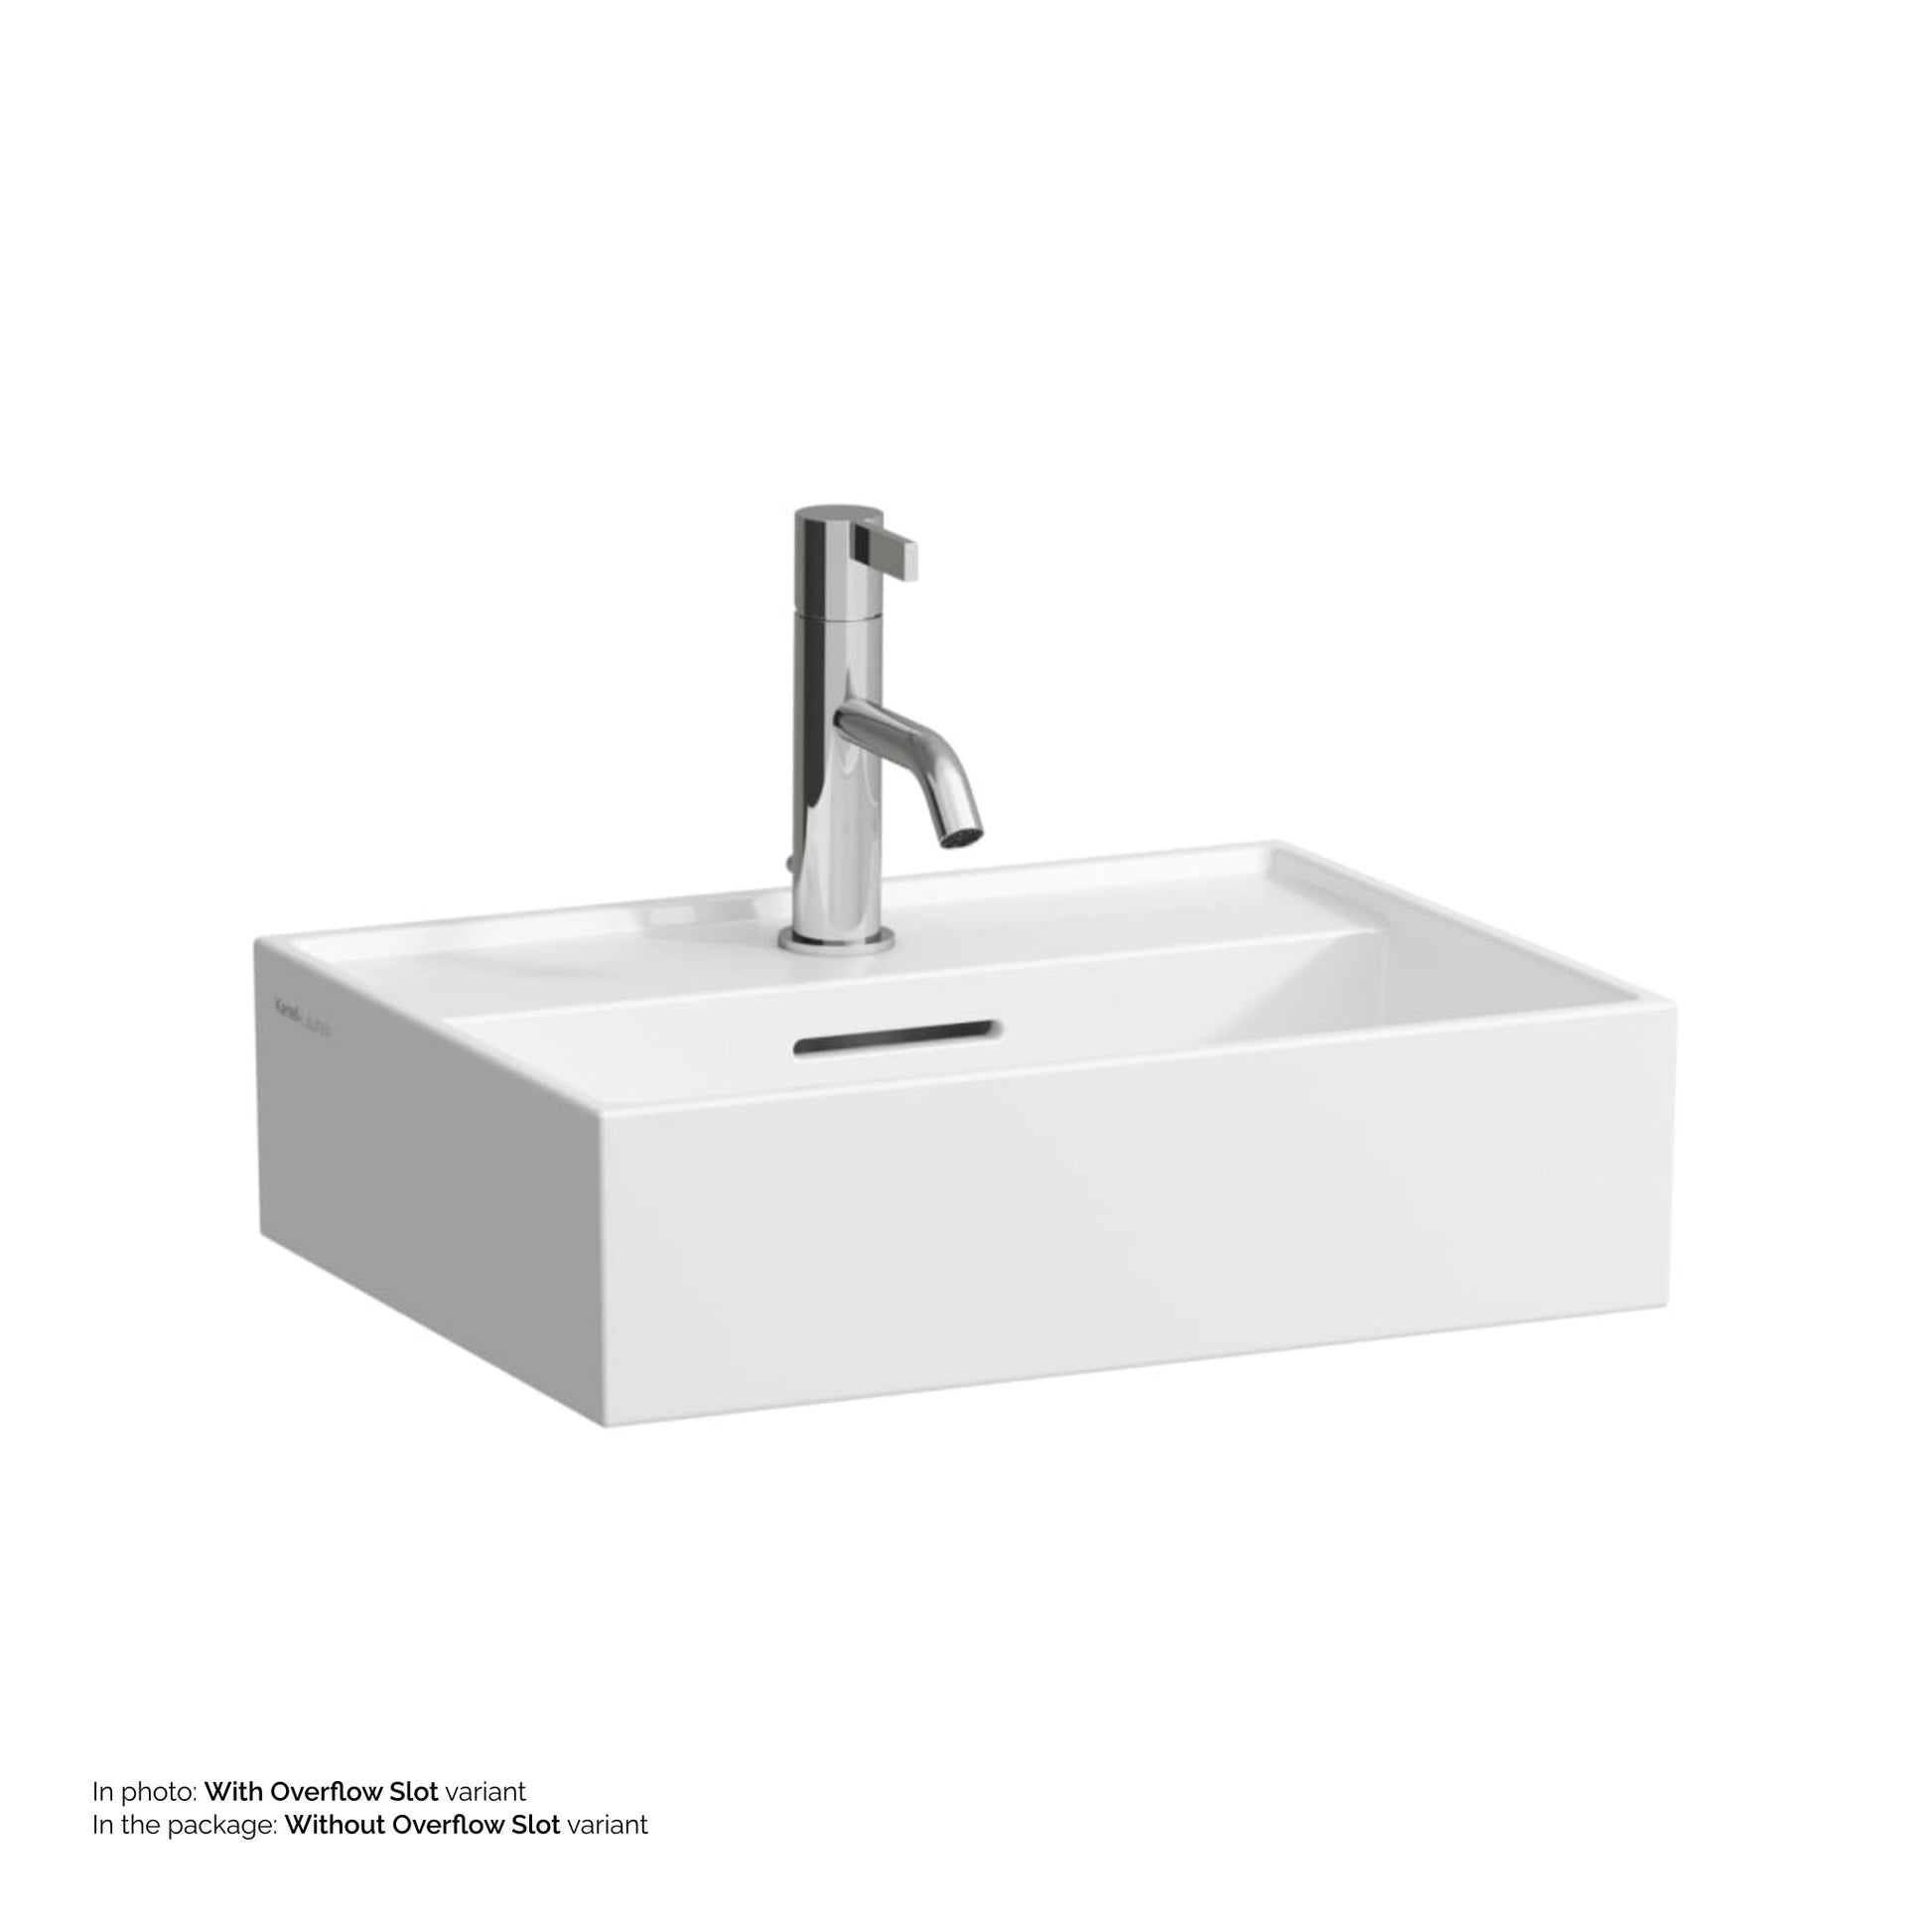 Laufen Kartell 18" x 13" White Countertop Bathroom Sink With Faucet Hole